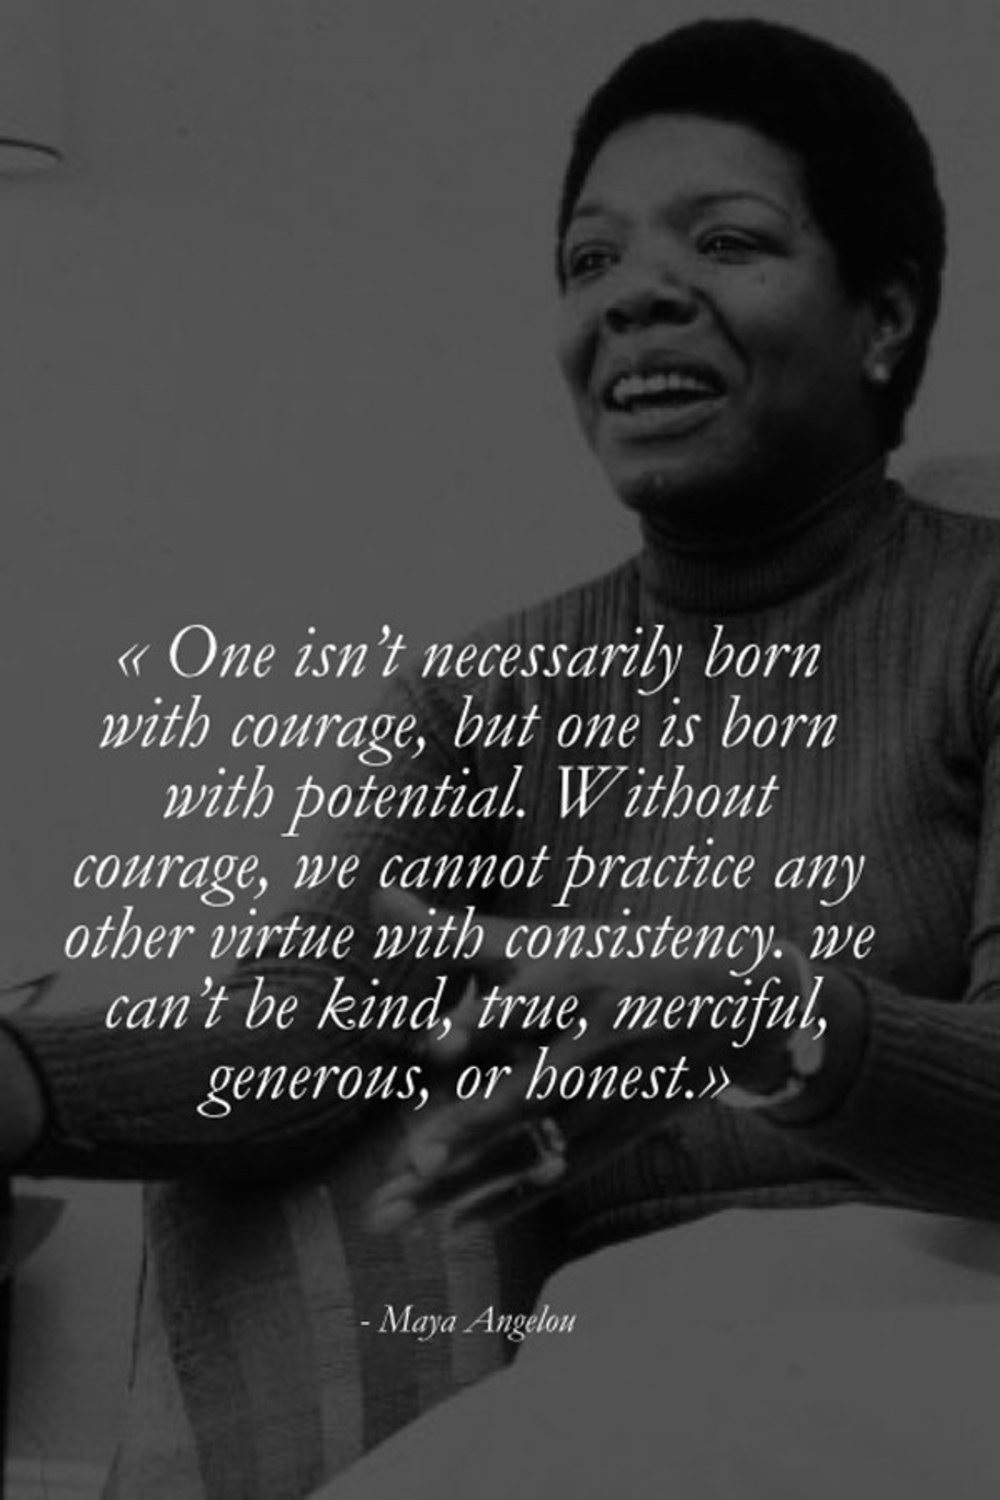  â€œOne isnâ€™t necessarily born with coverage, but one is born with potential. Without courage, we cannot practice any other virtue with consistency, we canâ€™t be kind, true, merciful, generous, or honest.â€   â€œIf you donâ€™t like something, change it. If you canâ€™t change it, change your attitude.â€   - Maya Angelou 